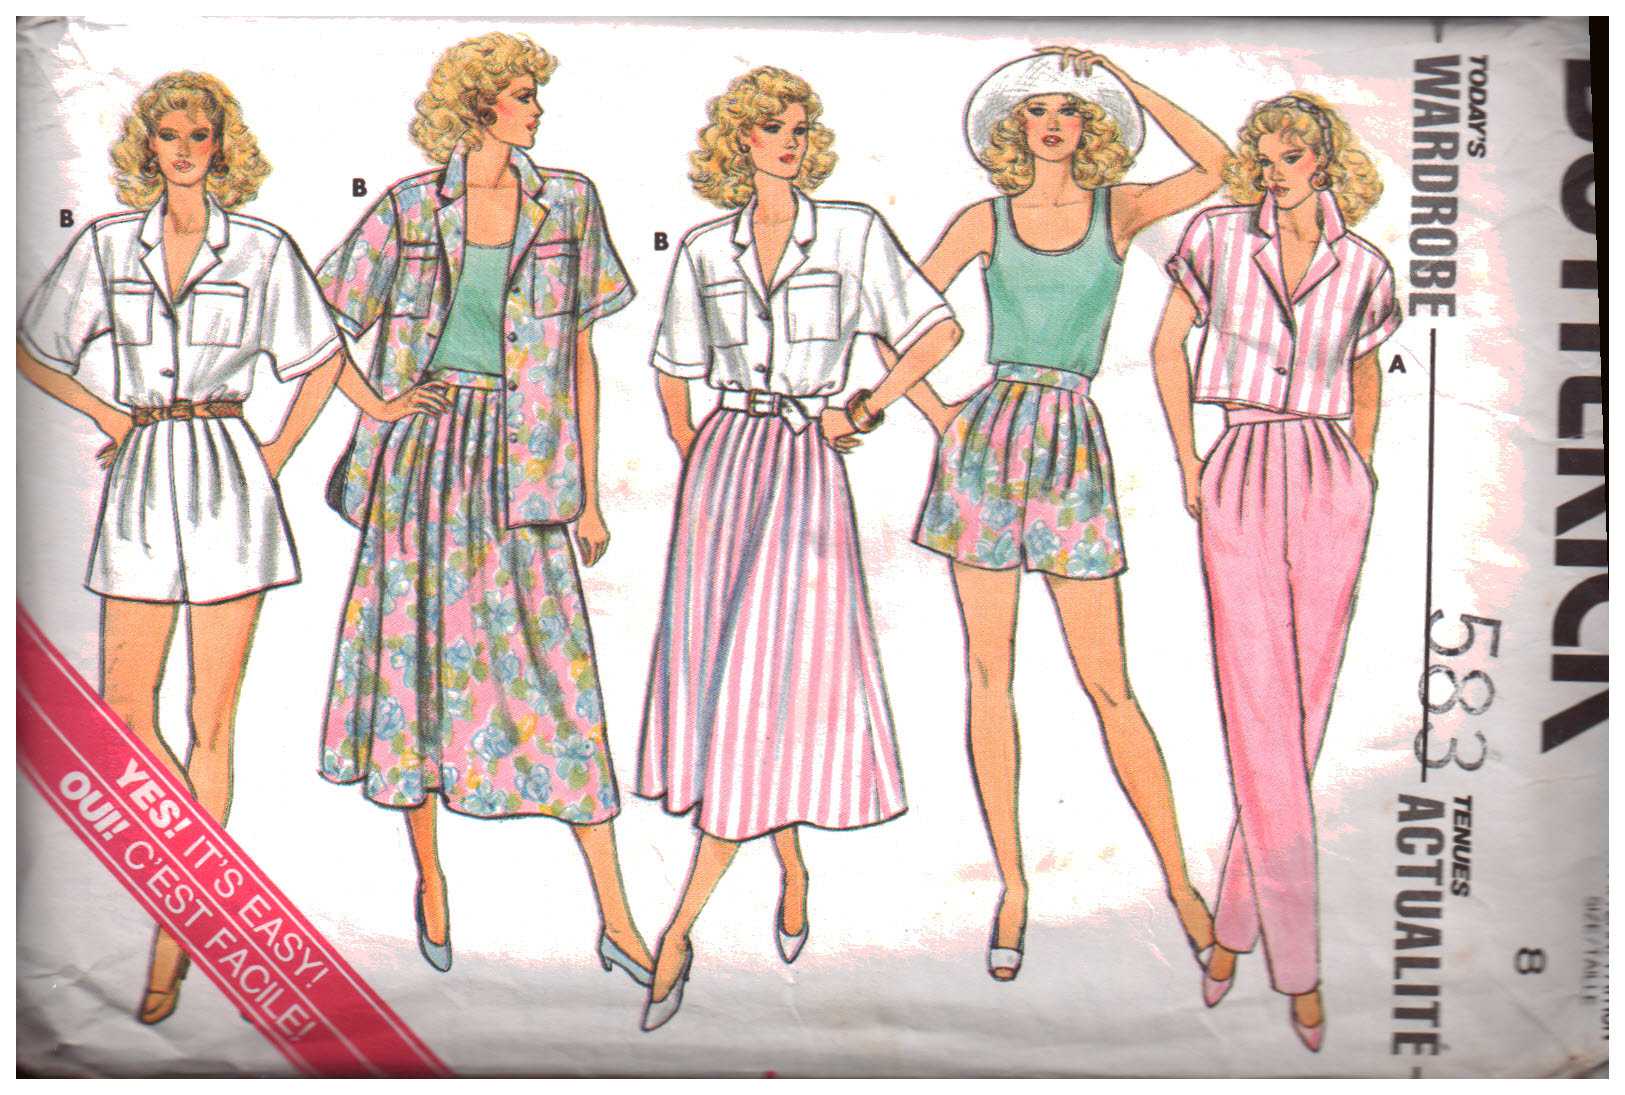 Butterick 4189 Suit - Tops, Skirts, Pants by Donna Ricco Size: 18